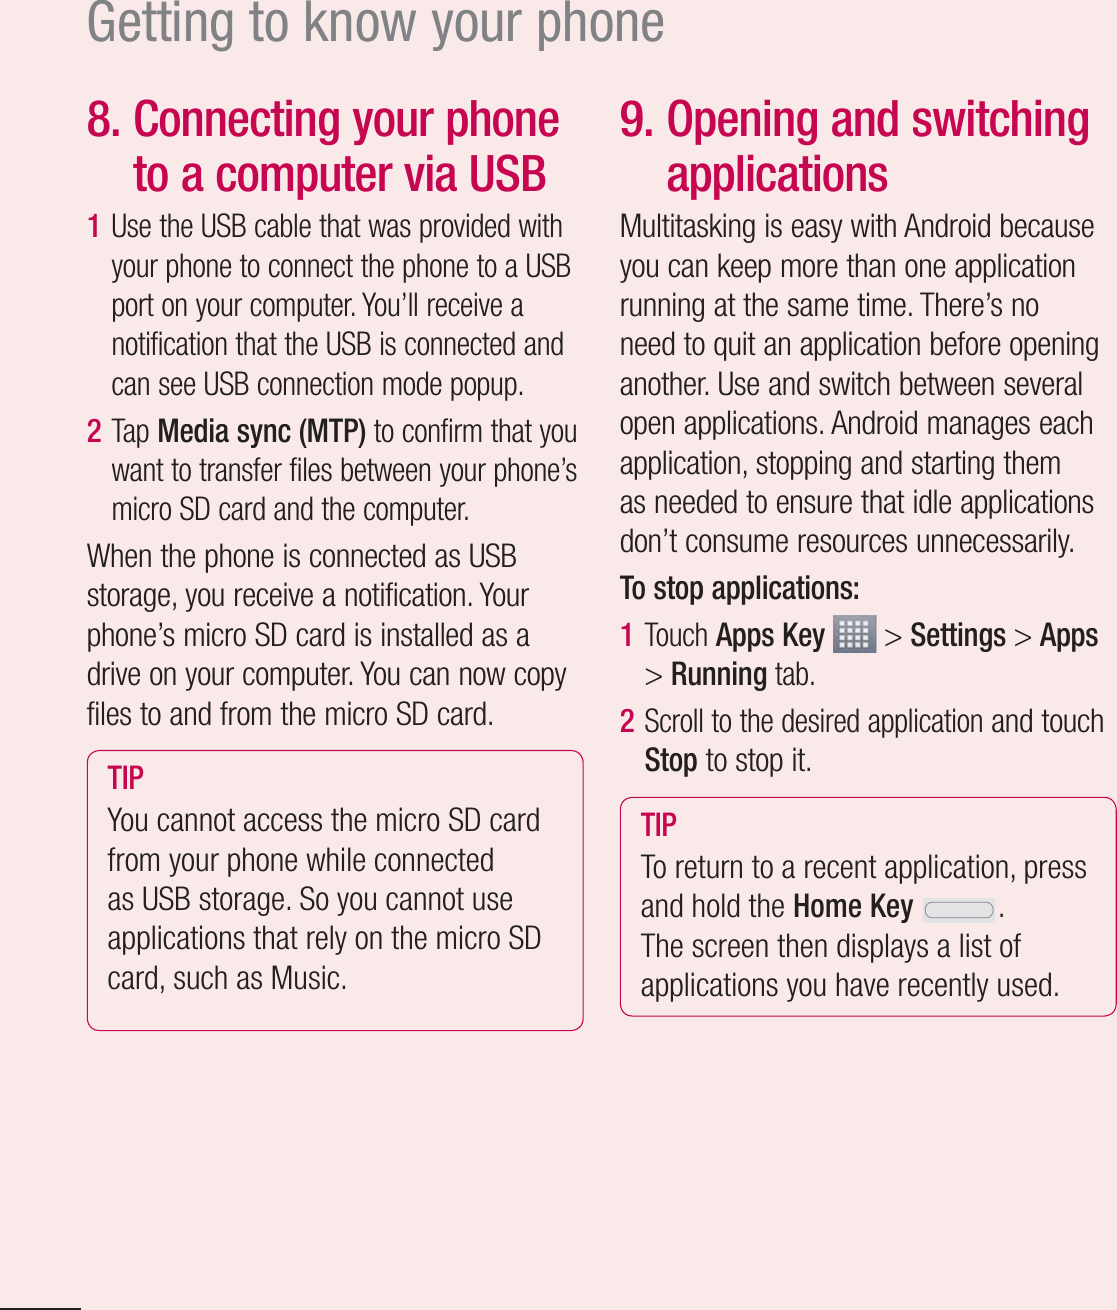 16Getting to know your phone8.  Connecting your phone to a computer via USB1  Use the USB cable that was provided with your phone to connect the phone to a USB port on your computer. You’ll receive a notification that the USB is connected and can see USB connection mode popup.2  Tap Media sync (MTP) to confirm that you want to transfer files between your phone’s micro SD card and the computer.When the phone is connected as USB storage, you receive a notification. Your phone’s micro SD card is installed as a drive on your computer. You can now copy files to and from the micro SD card.TIP You cannot access the micro SD card from your phone while connected as USB storage. So you cannot use applications that rely on the micro SD card, such as Music.9.  Opening and switching applicationsMultitasking is easy with Android because you can keep more than one application running at the same time. There’s no need to quit an application before opening another. Use and switch between several open applications. Android manages each application, stopping and starting them as needed to ensure that idle applications don’t consume resources unnecessarily.To stop applications:1  Touch Apps Key  &gt; Settings &gt; Apps &gt; Running tab.2  Scroll to the desired application and touch Stop to stop it.TIP To return to a recent application, press and hold the Home Key .The screen then displays a list of applications you have recently used.